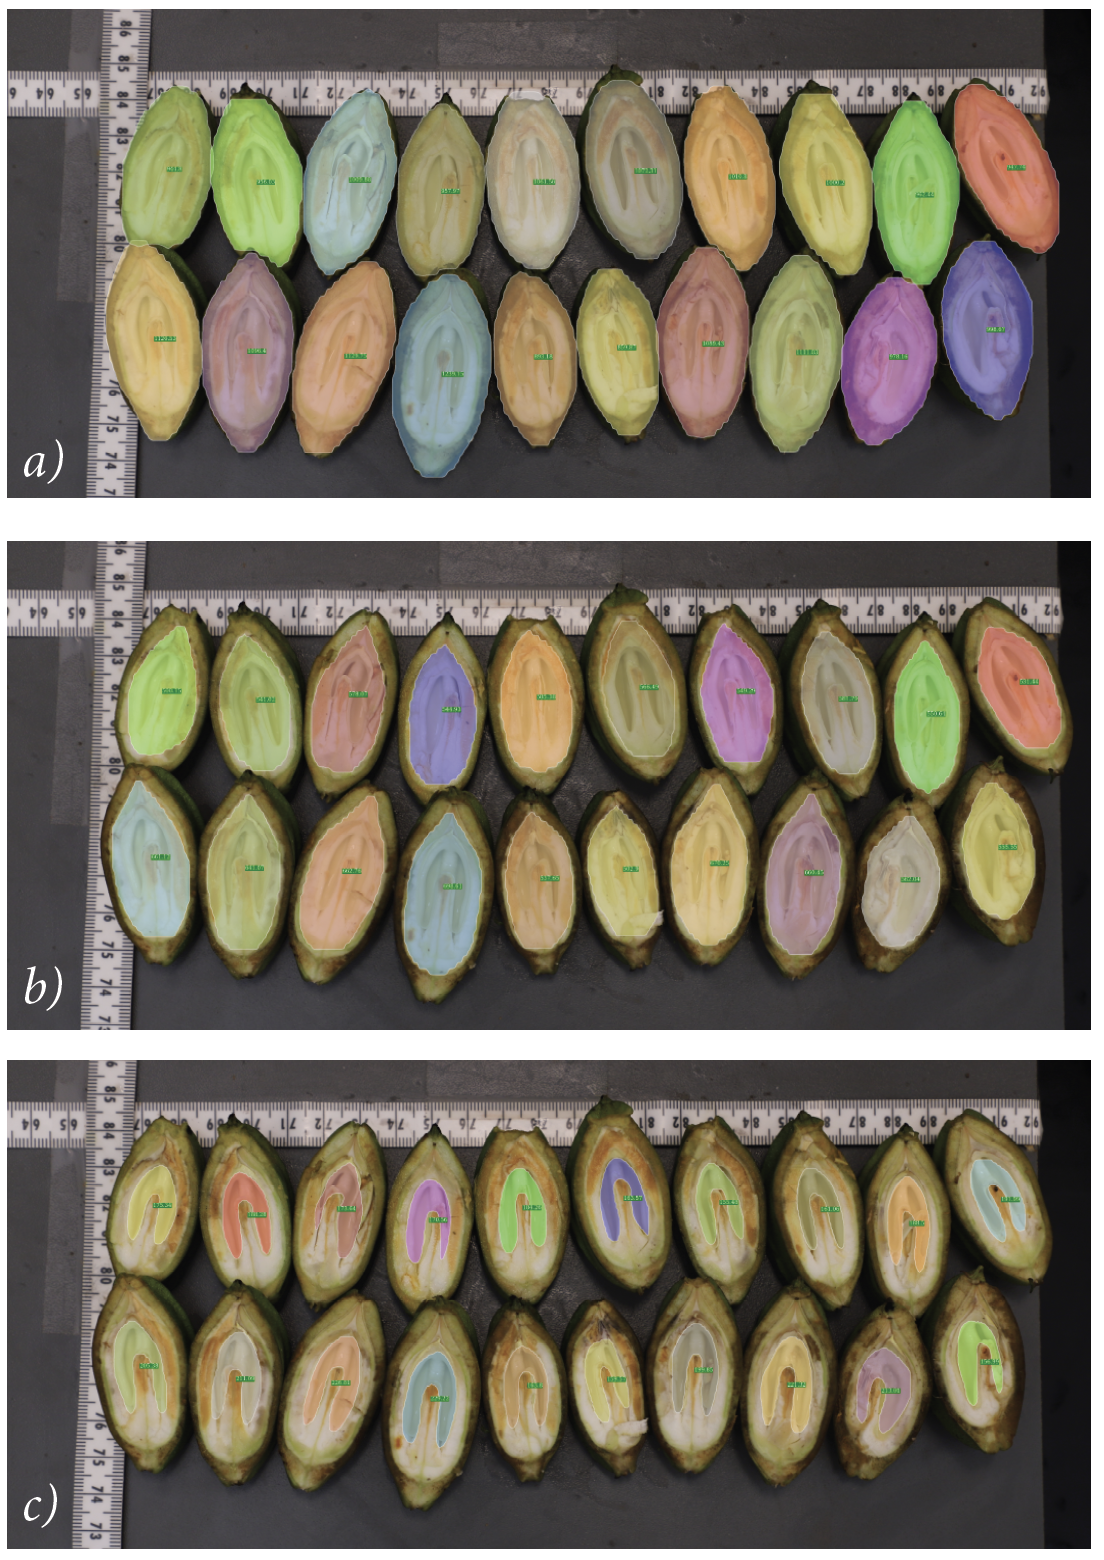 Three stacked photos exhibit how Zhang's team measure the shuck, shell, and embryo of each cultivar.